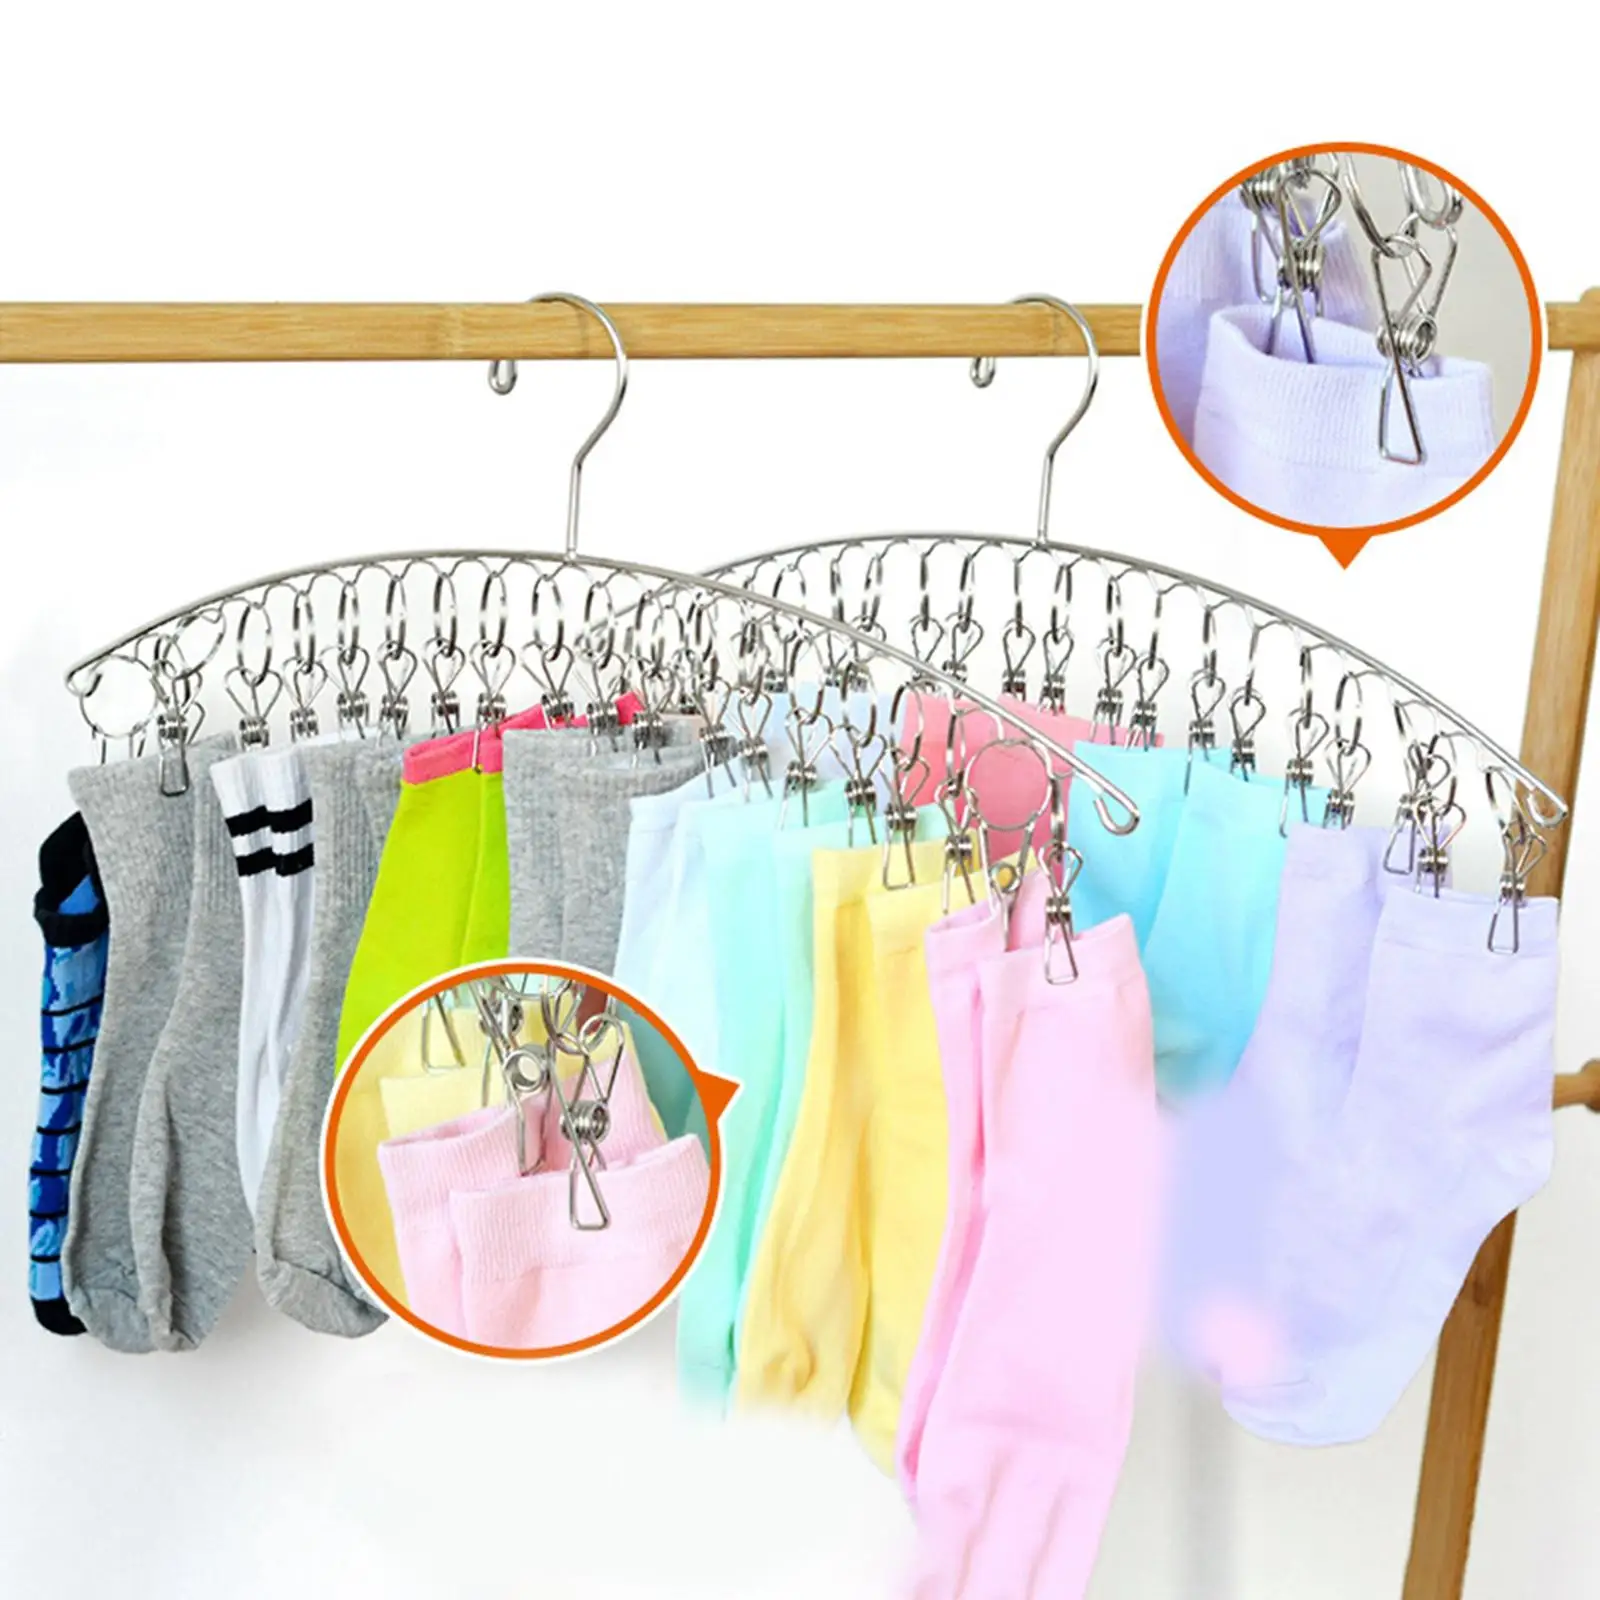 2x Clothes Drying Rack, Laundry Hanger, with 20 Clips Space Saving Multifunctional Handkerchief for Drying Socks Underwear Hats